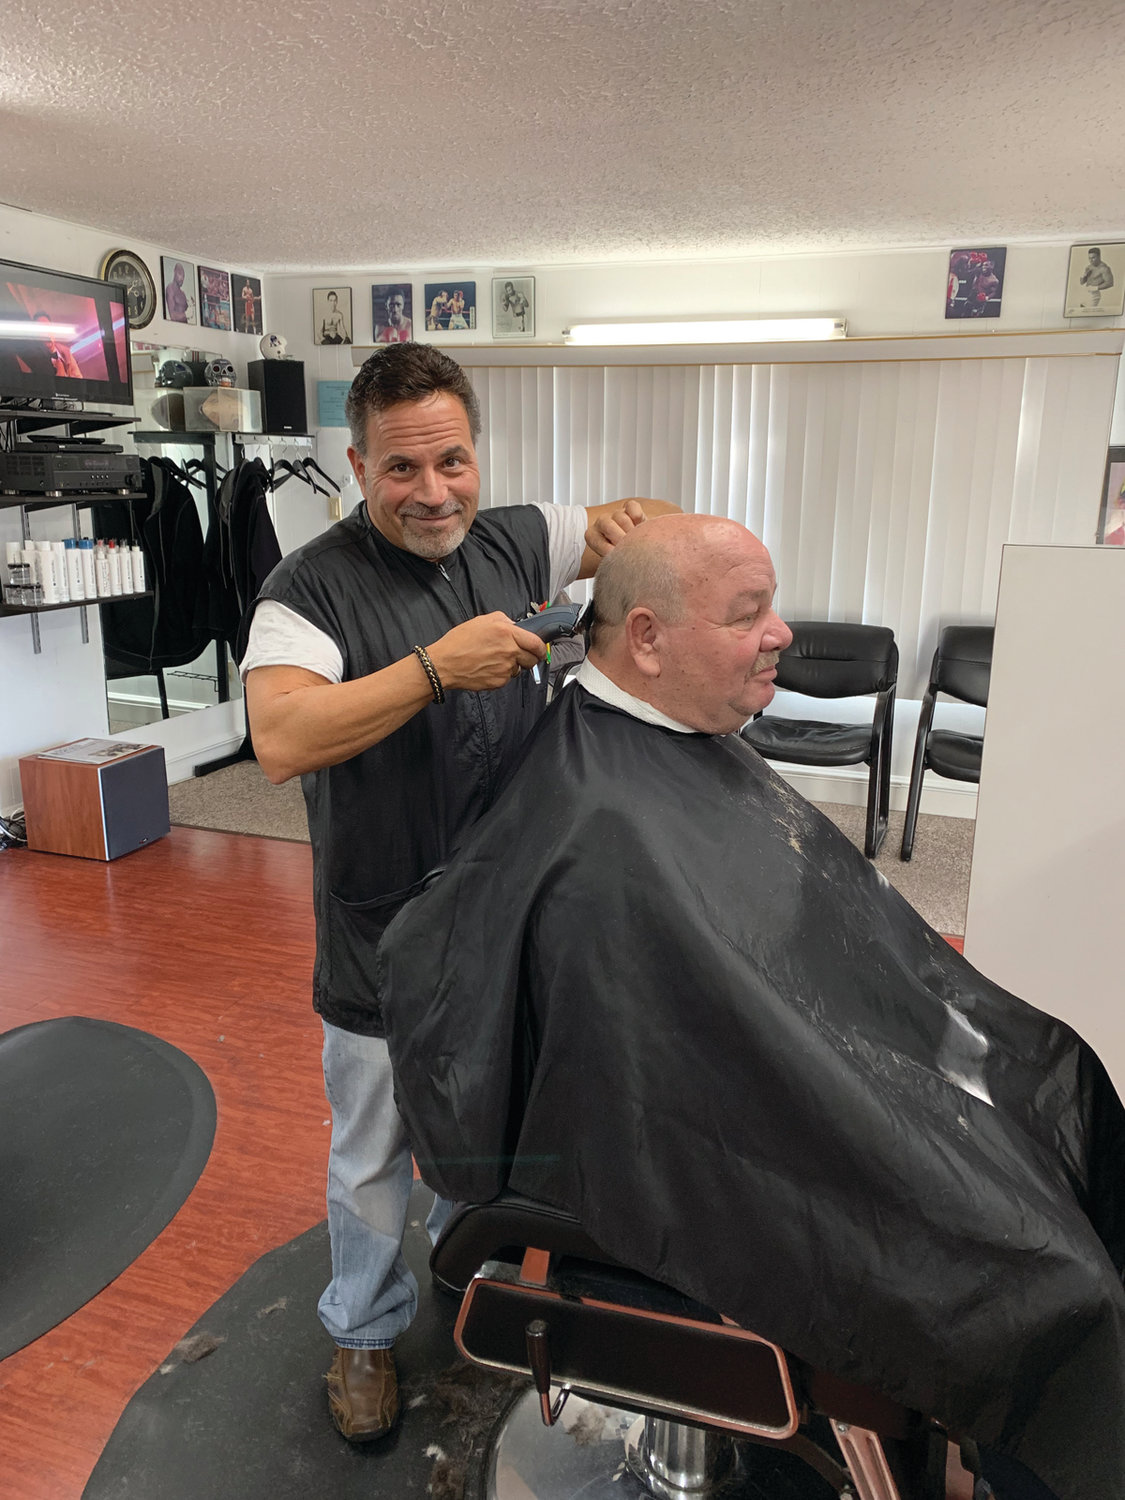 Dave Picozzi catches the lens of the camera as he cuts the hair of longtime customer Roy Kelvey.  Roy and Dave have known each other for over 30 years when Dave first started cutting Roy’s hair. Loyalty and longevity are two things David’s Greenwood Barbershop values and has worked hard for.